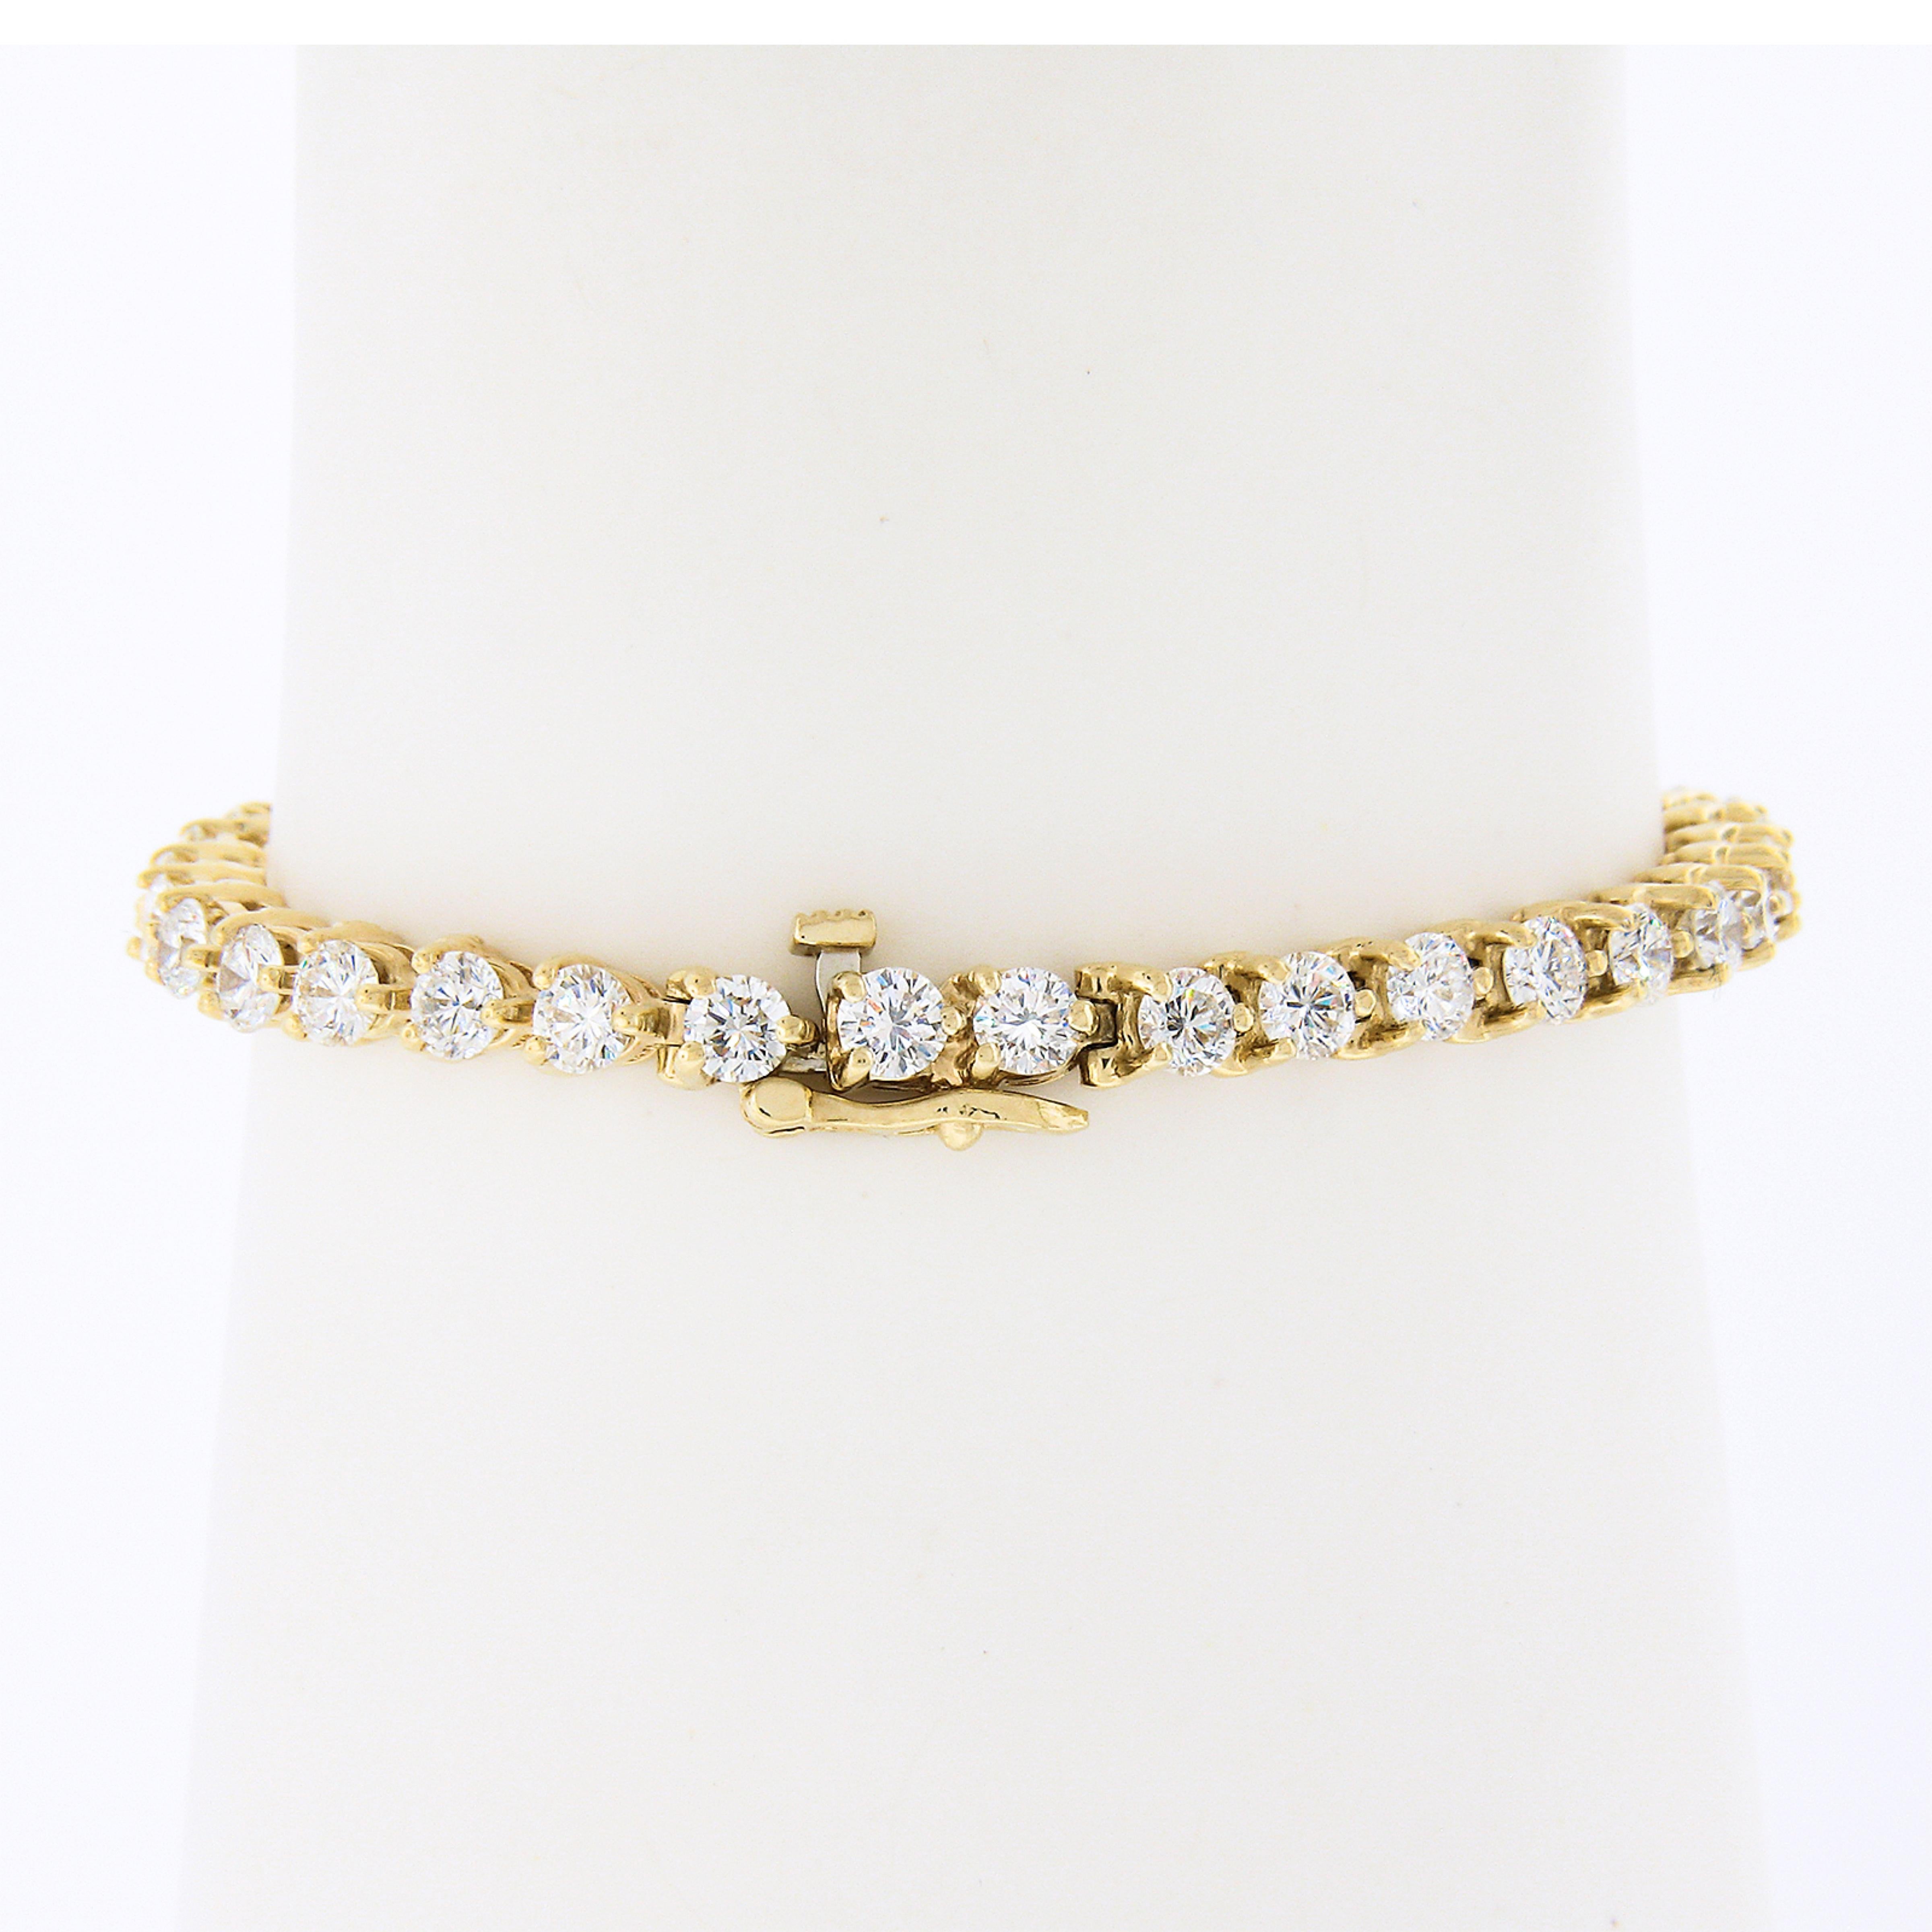 Here we have a truly breathtaking and classic diamond line tennis bracelet that is crafted in solid 14k yellow gold and set with 36 very fine quality round brilliant cut diamonds throughout. Each diamond individually sits in a fine and sturdy